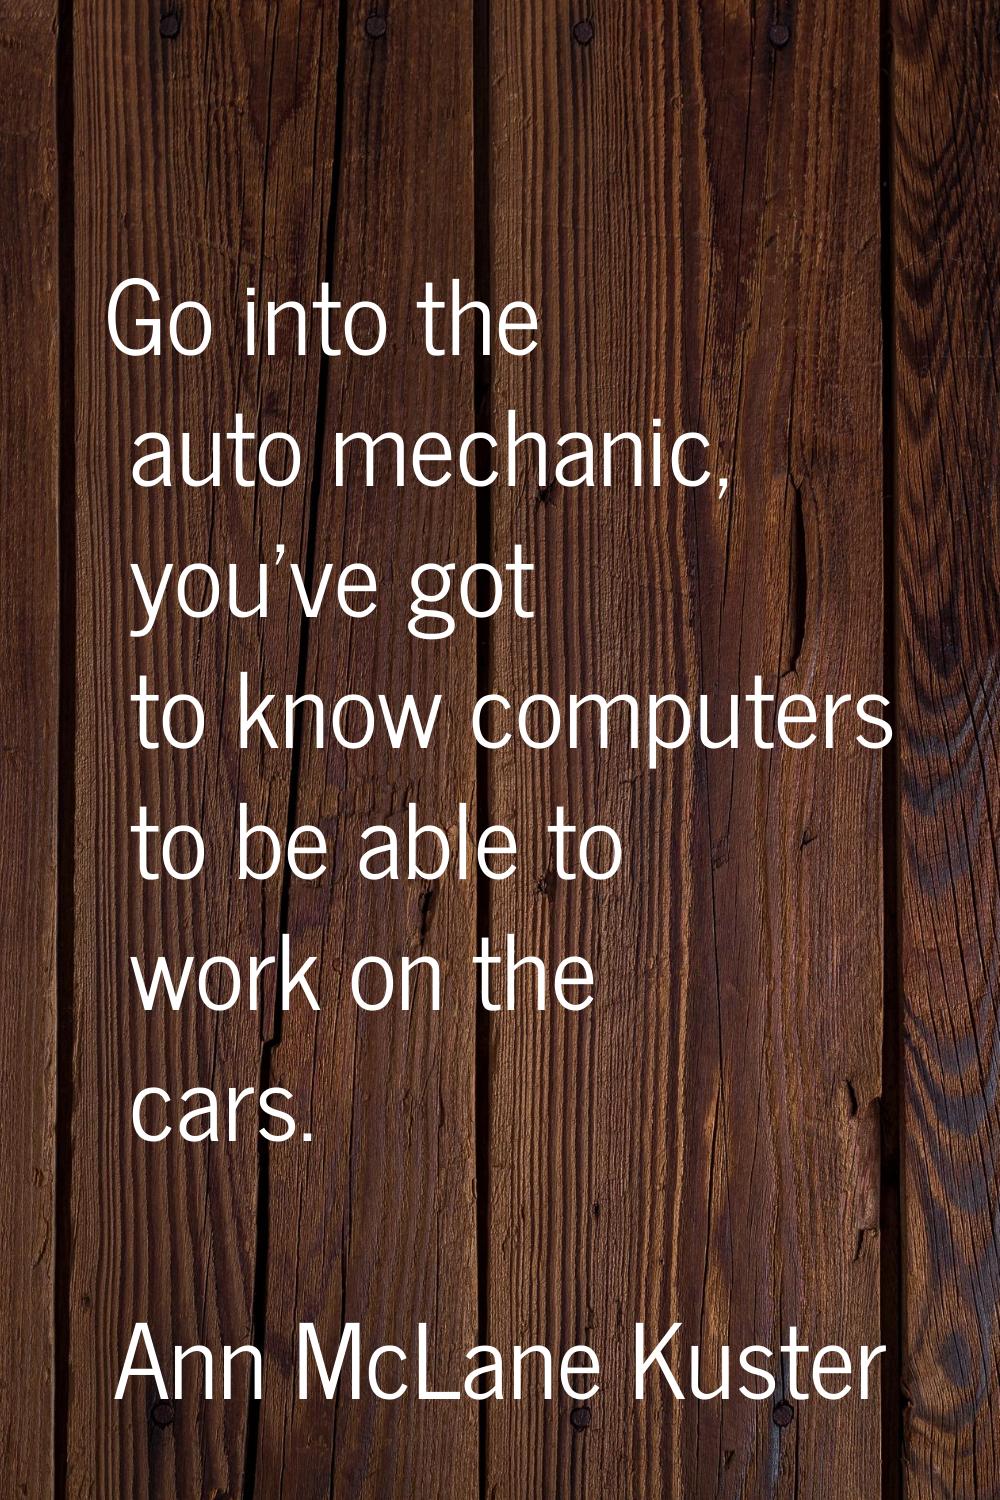 Go into the auto mechanic, you've got to know computers to be able to work on the cars.